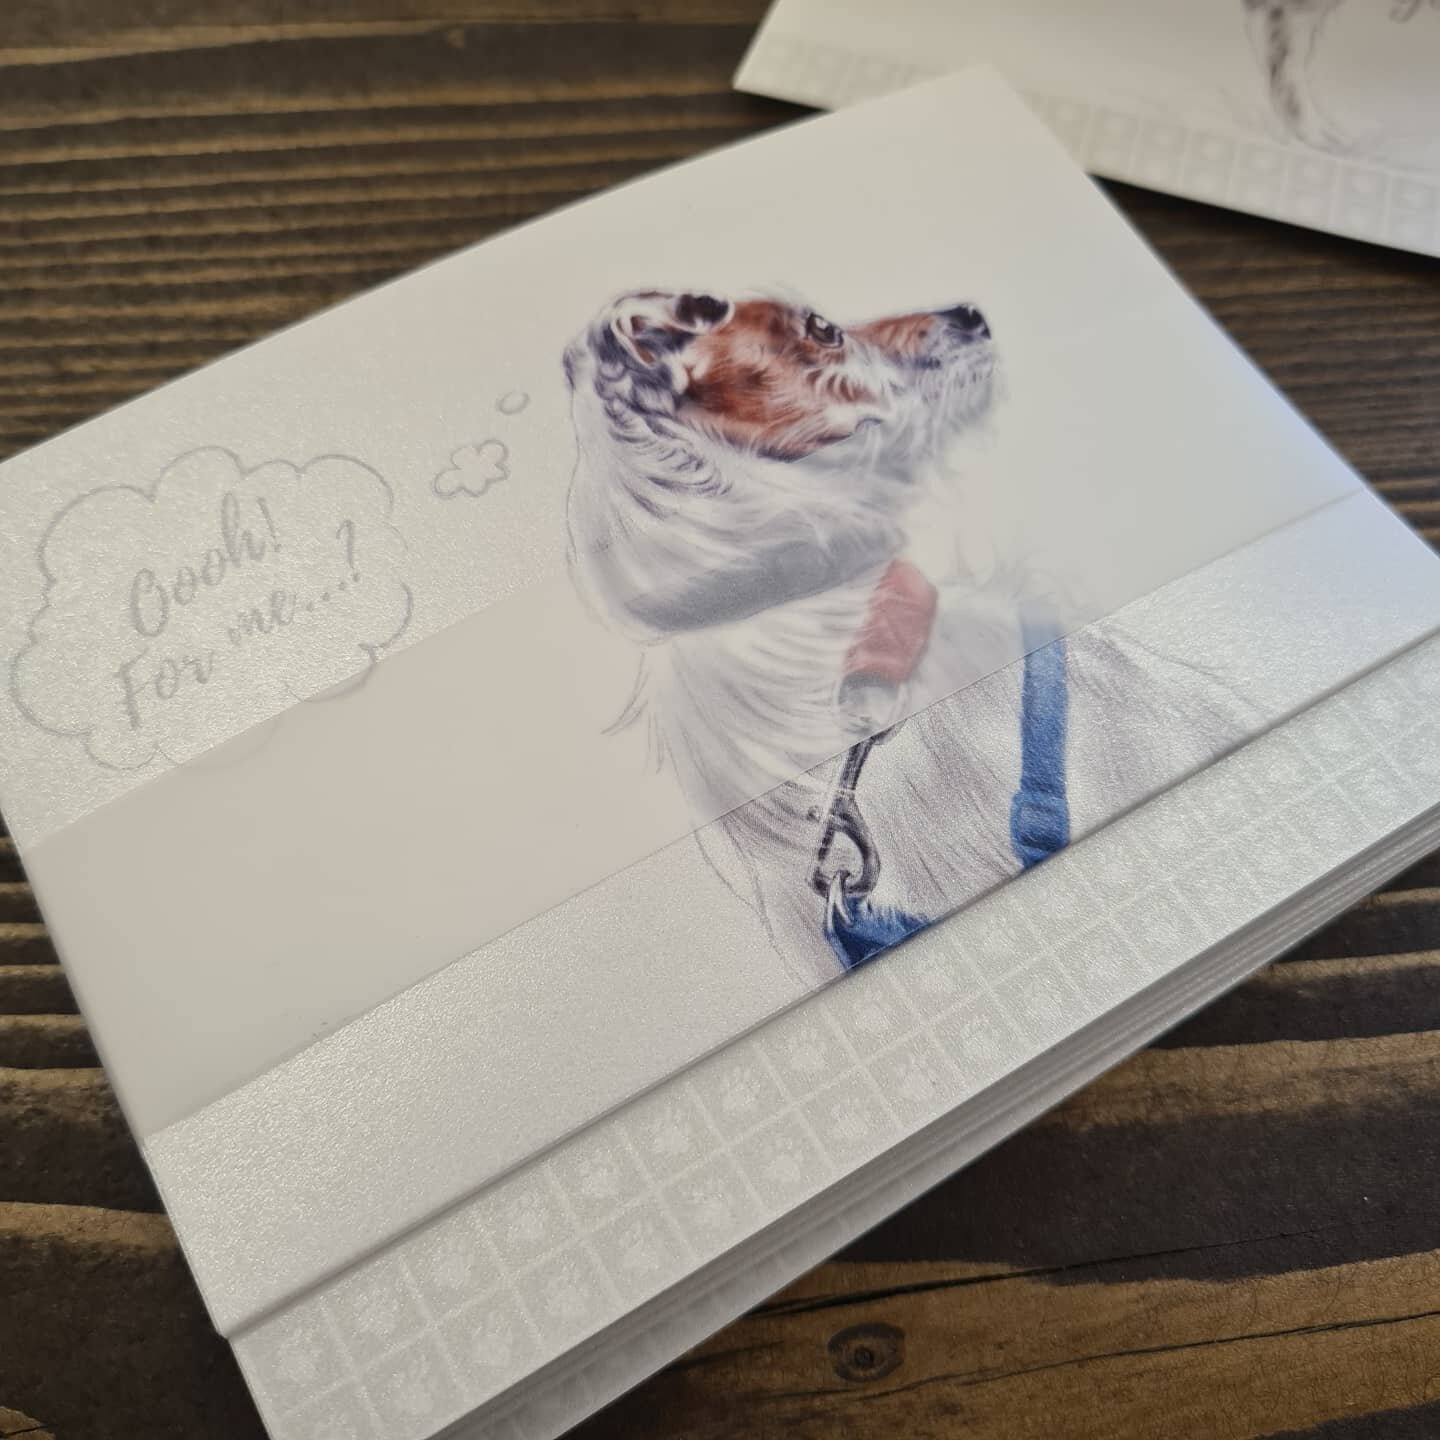 Hi ho, hi ho it's off delivering I go . . . . . Got these fabulous gift vouchers and note cards ready with some other inky goodness to go off to @animal_magic_art - if you want a pet portrait or a gift voucher for anyone go and check her out 👍👍
.
.